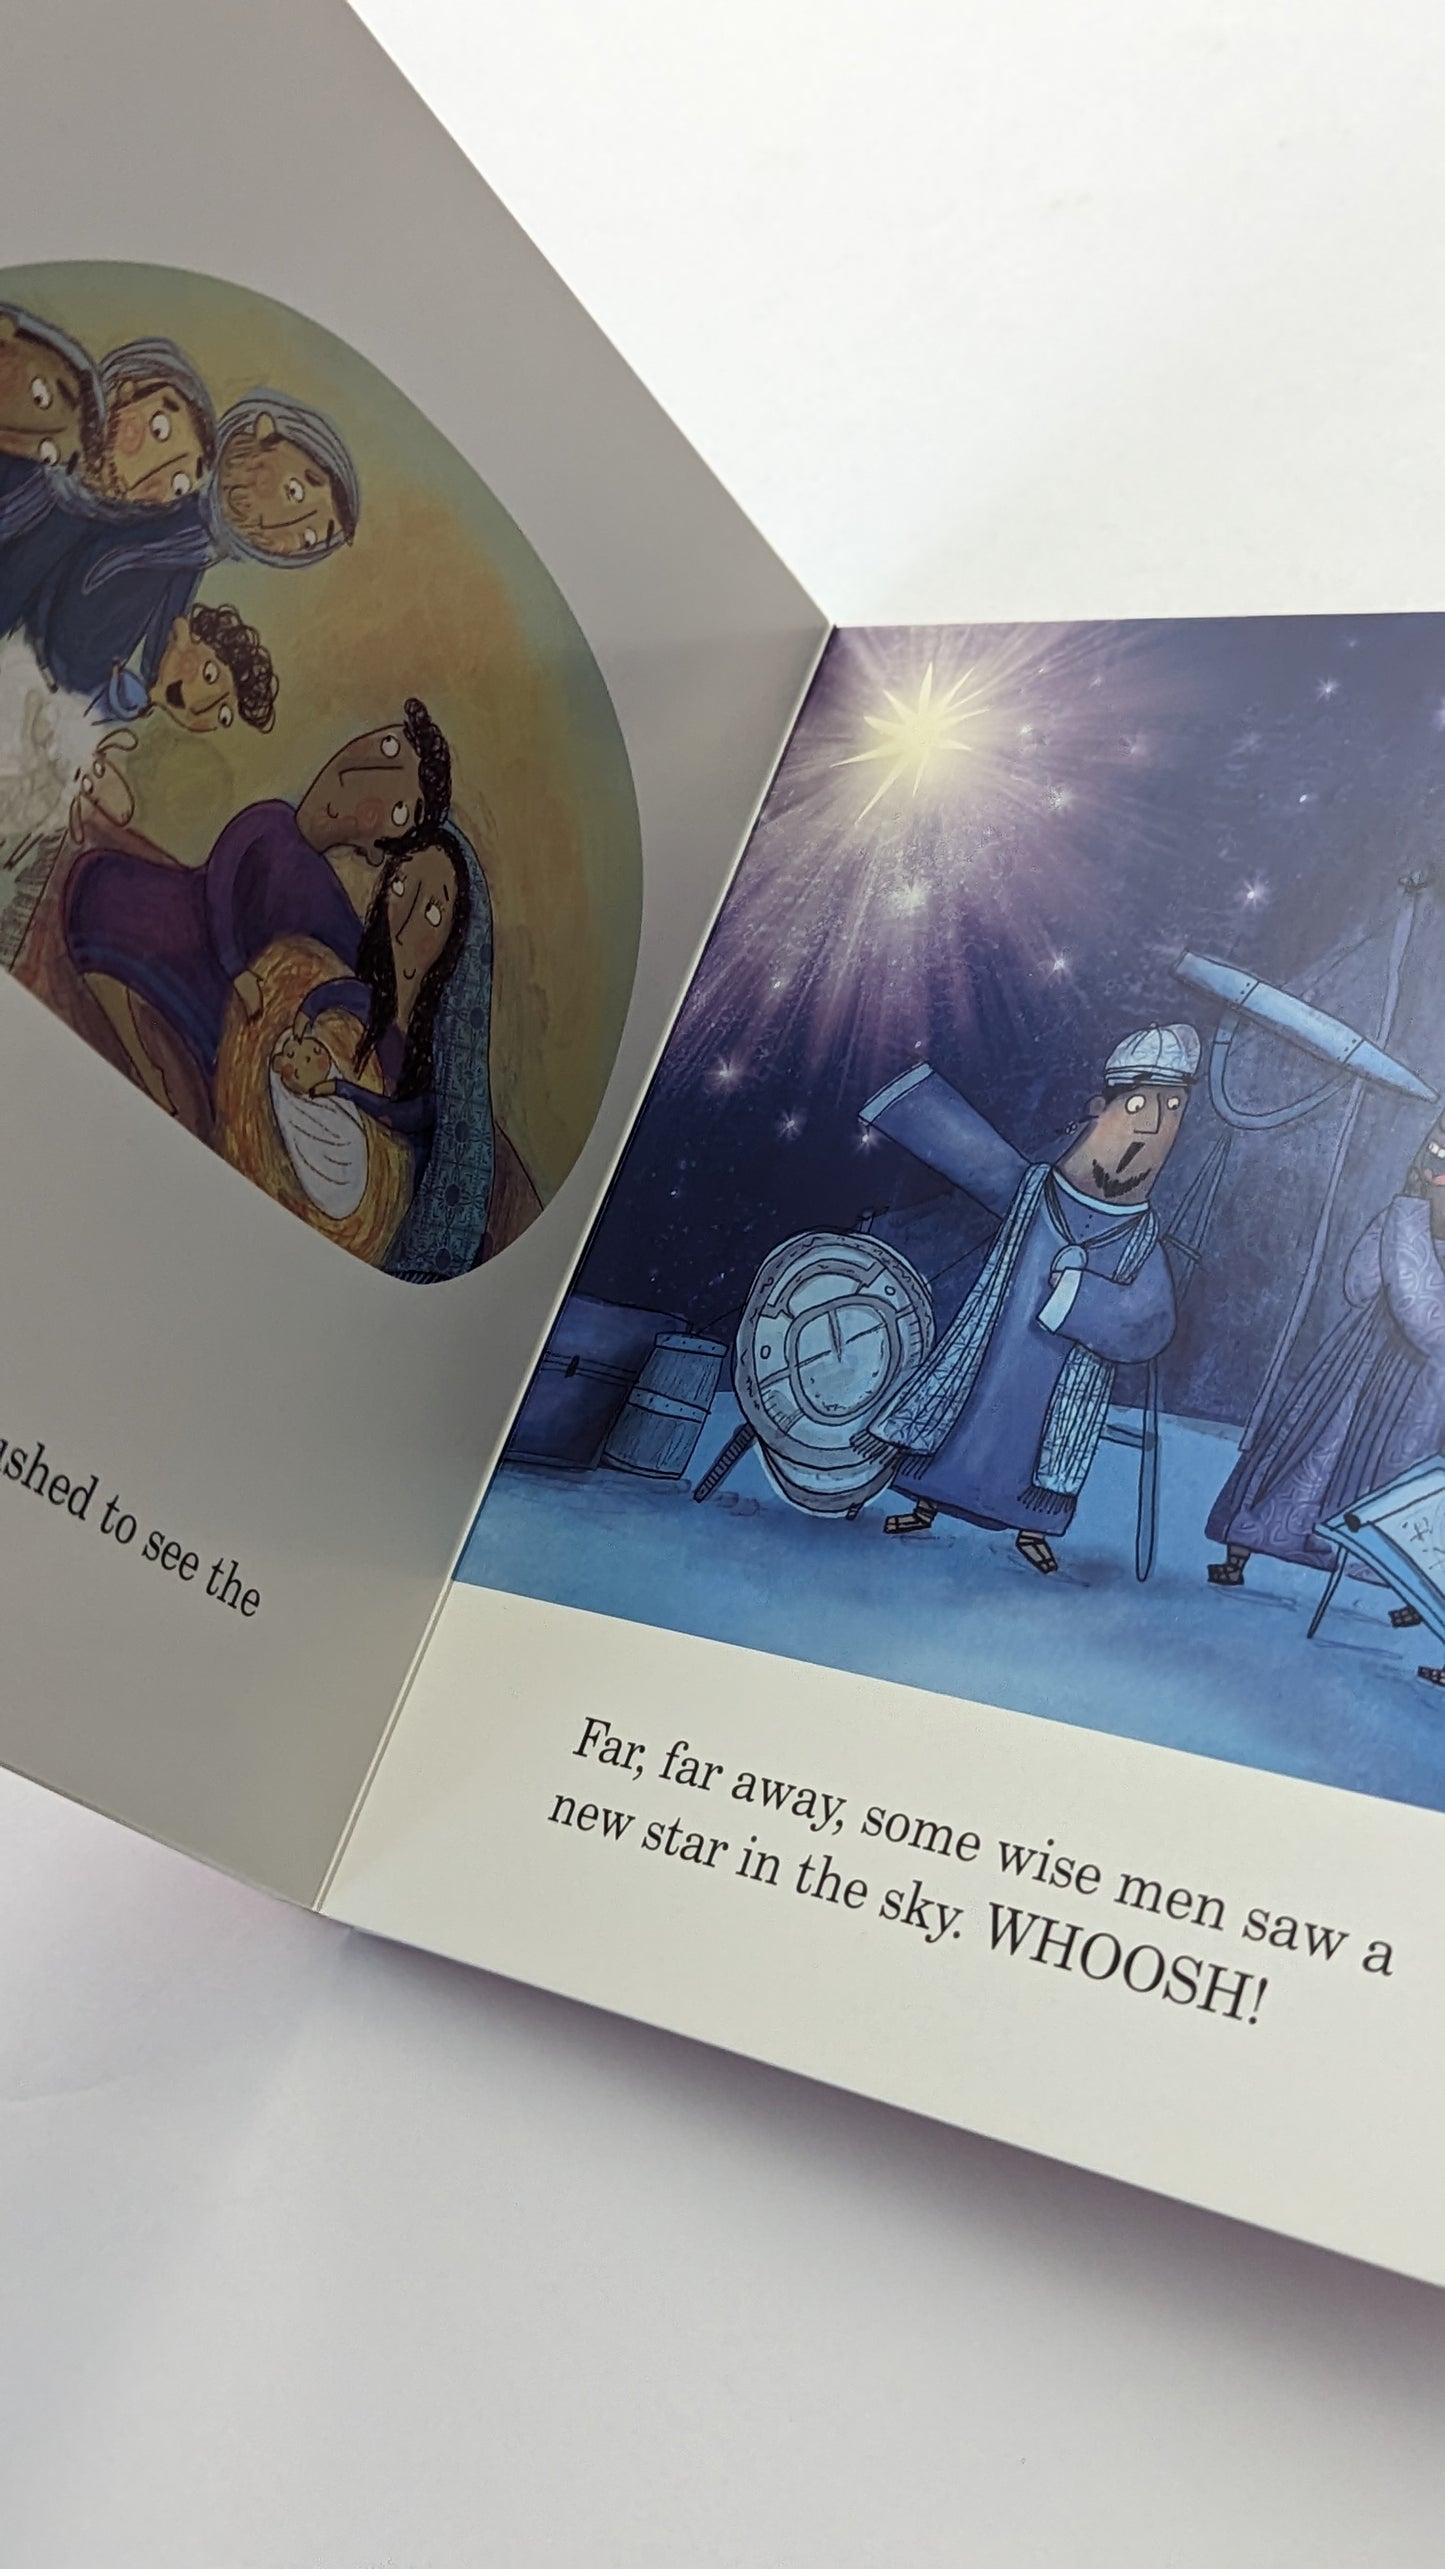 The Christmas Promise (Board Book)